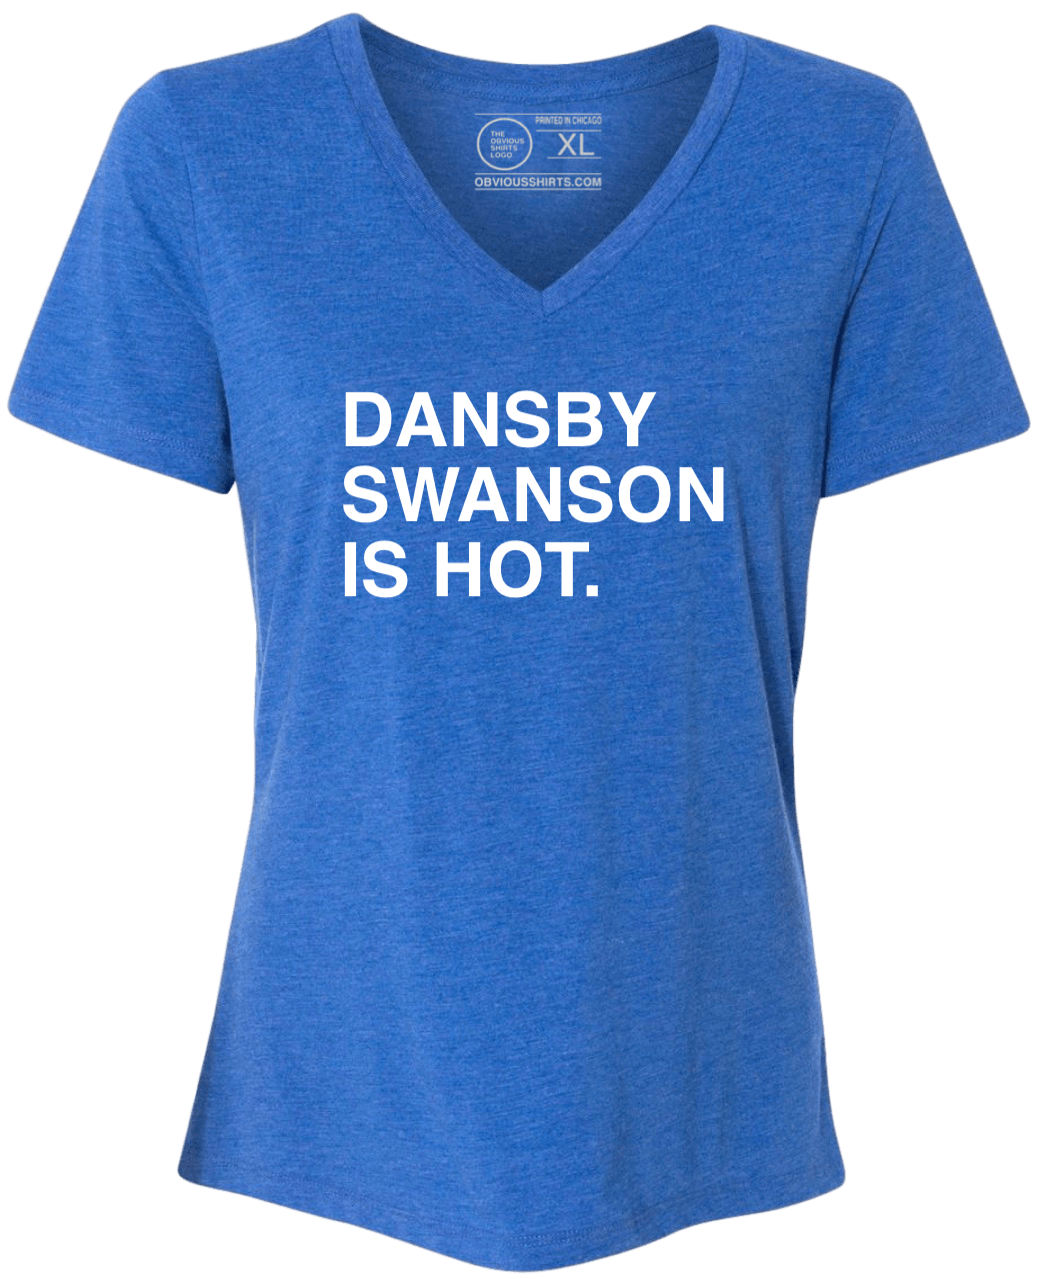 DANSBY SWANSON IS HOT. (V-NECK) - OBVIOUS SHIRTS